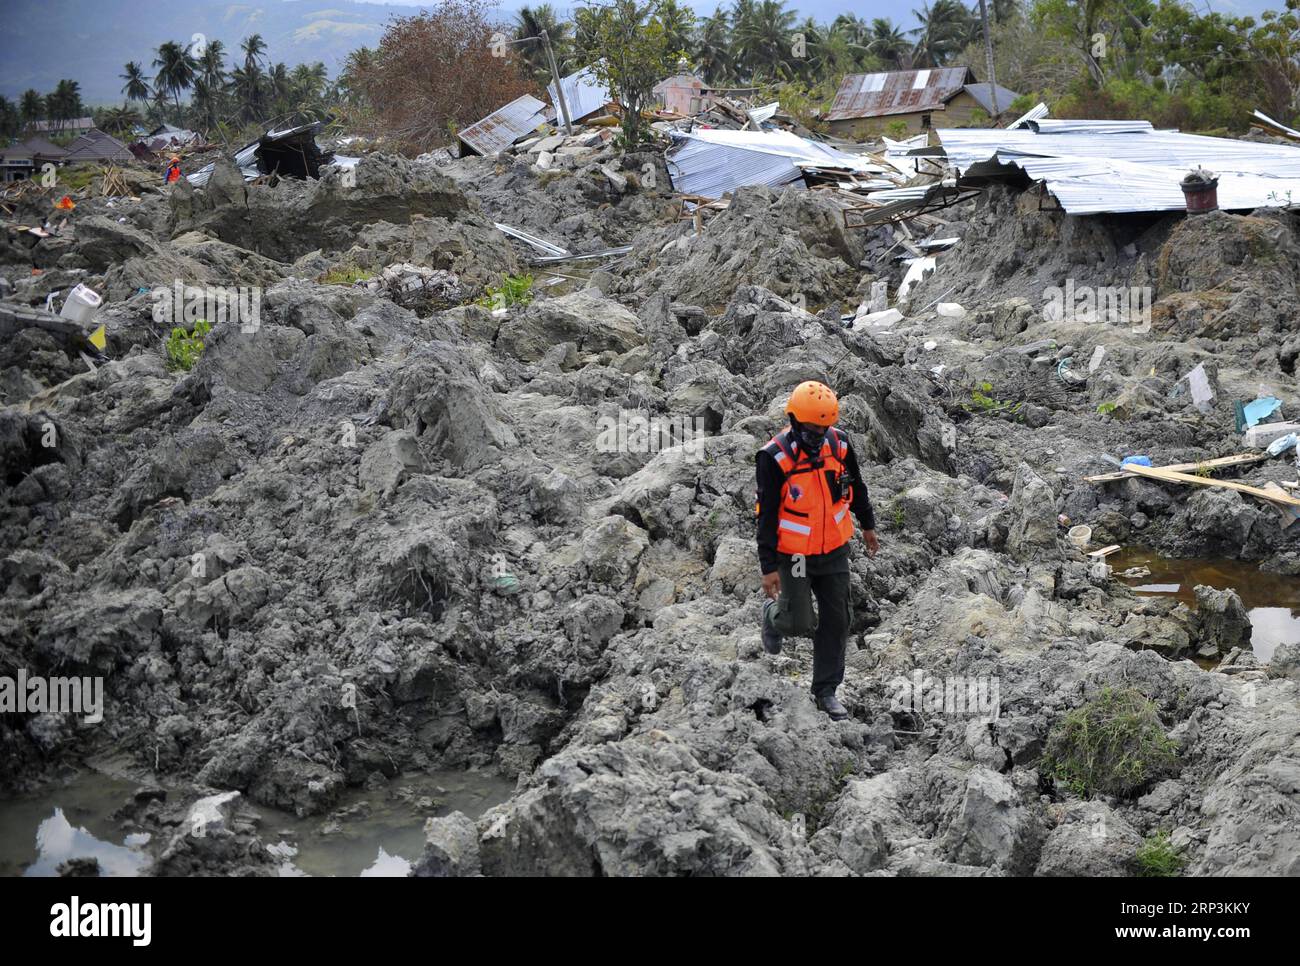 (181010) -- POSO, Oct. 10, 2018 -- An Indonesian rescuer walks on dried mud in Poso, Central Sulawesi Province, Indonesia, on Oct. 9, 2018. The earthquakes and the tsunami have killed at least 2,010 people, left over 5,000 others missing and triggered massive damage and a huge evacuation, according to the national disaster management agency. ) (yy) INDONESIA-POSO-EARTHQUAKE AND TSUNAMI-AFTERMATH Zulkarnain PUBLICATIONxNOTxINxCHN Stock Photo